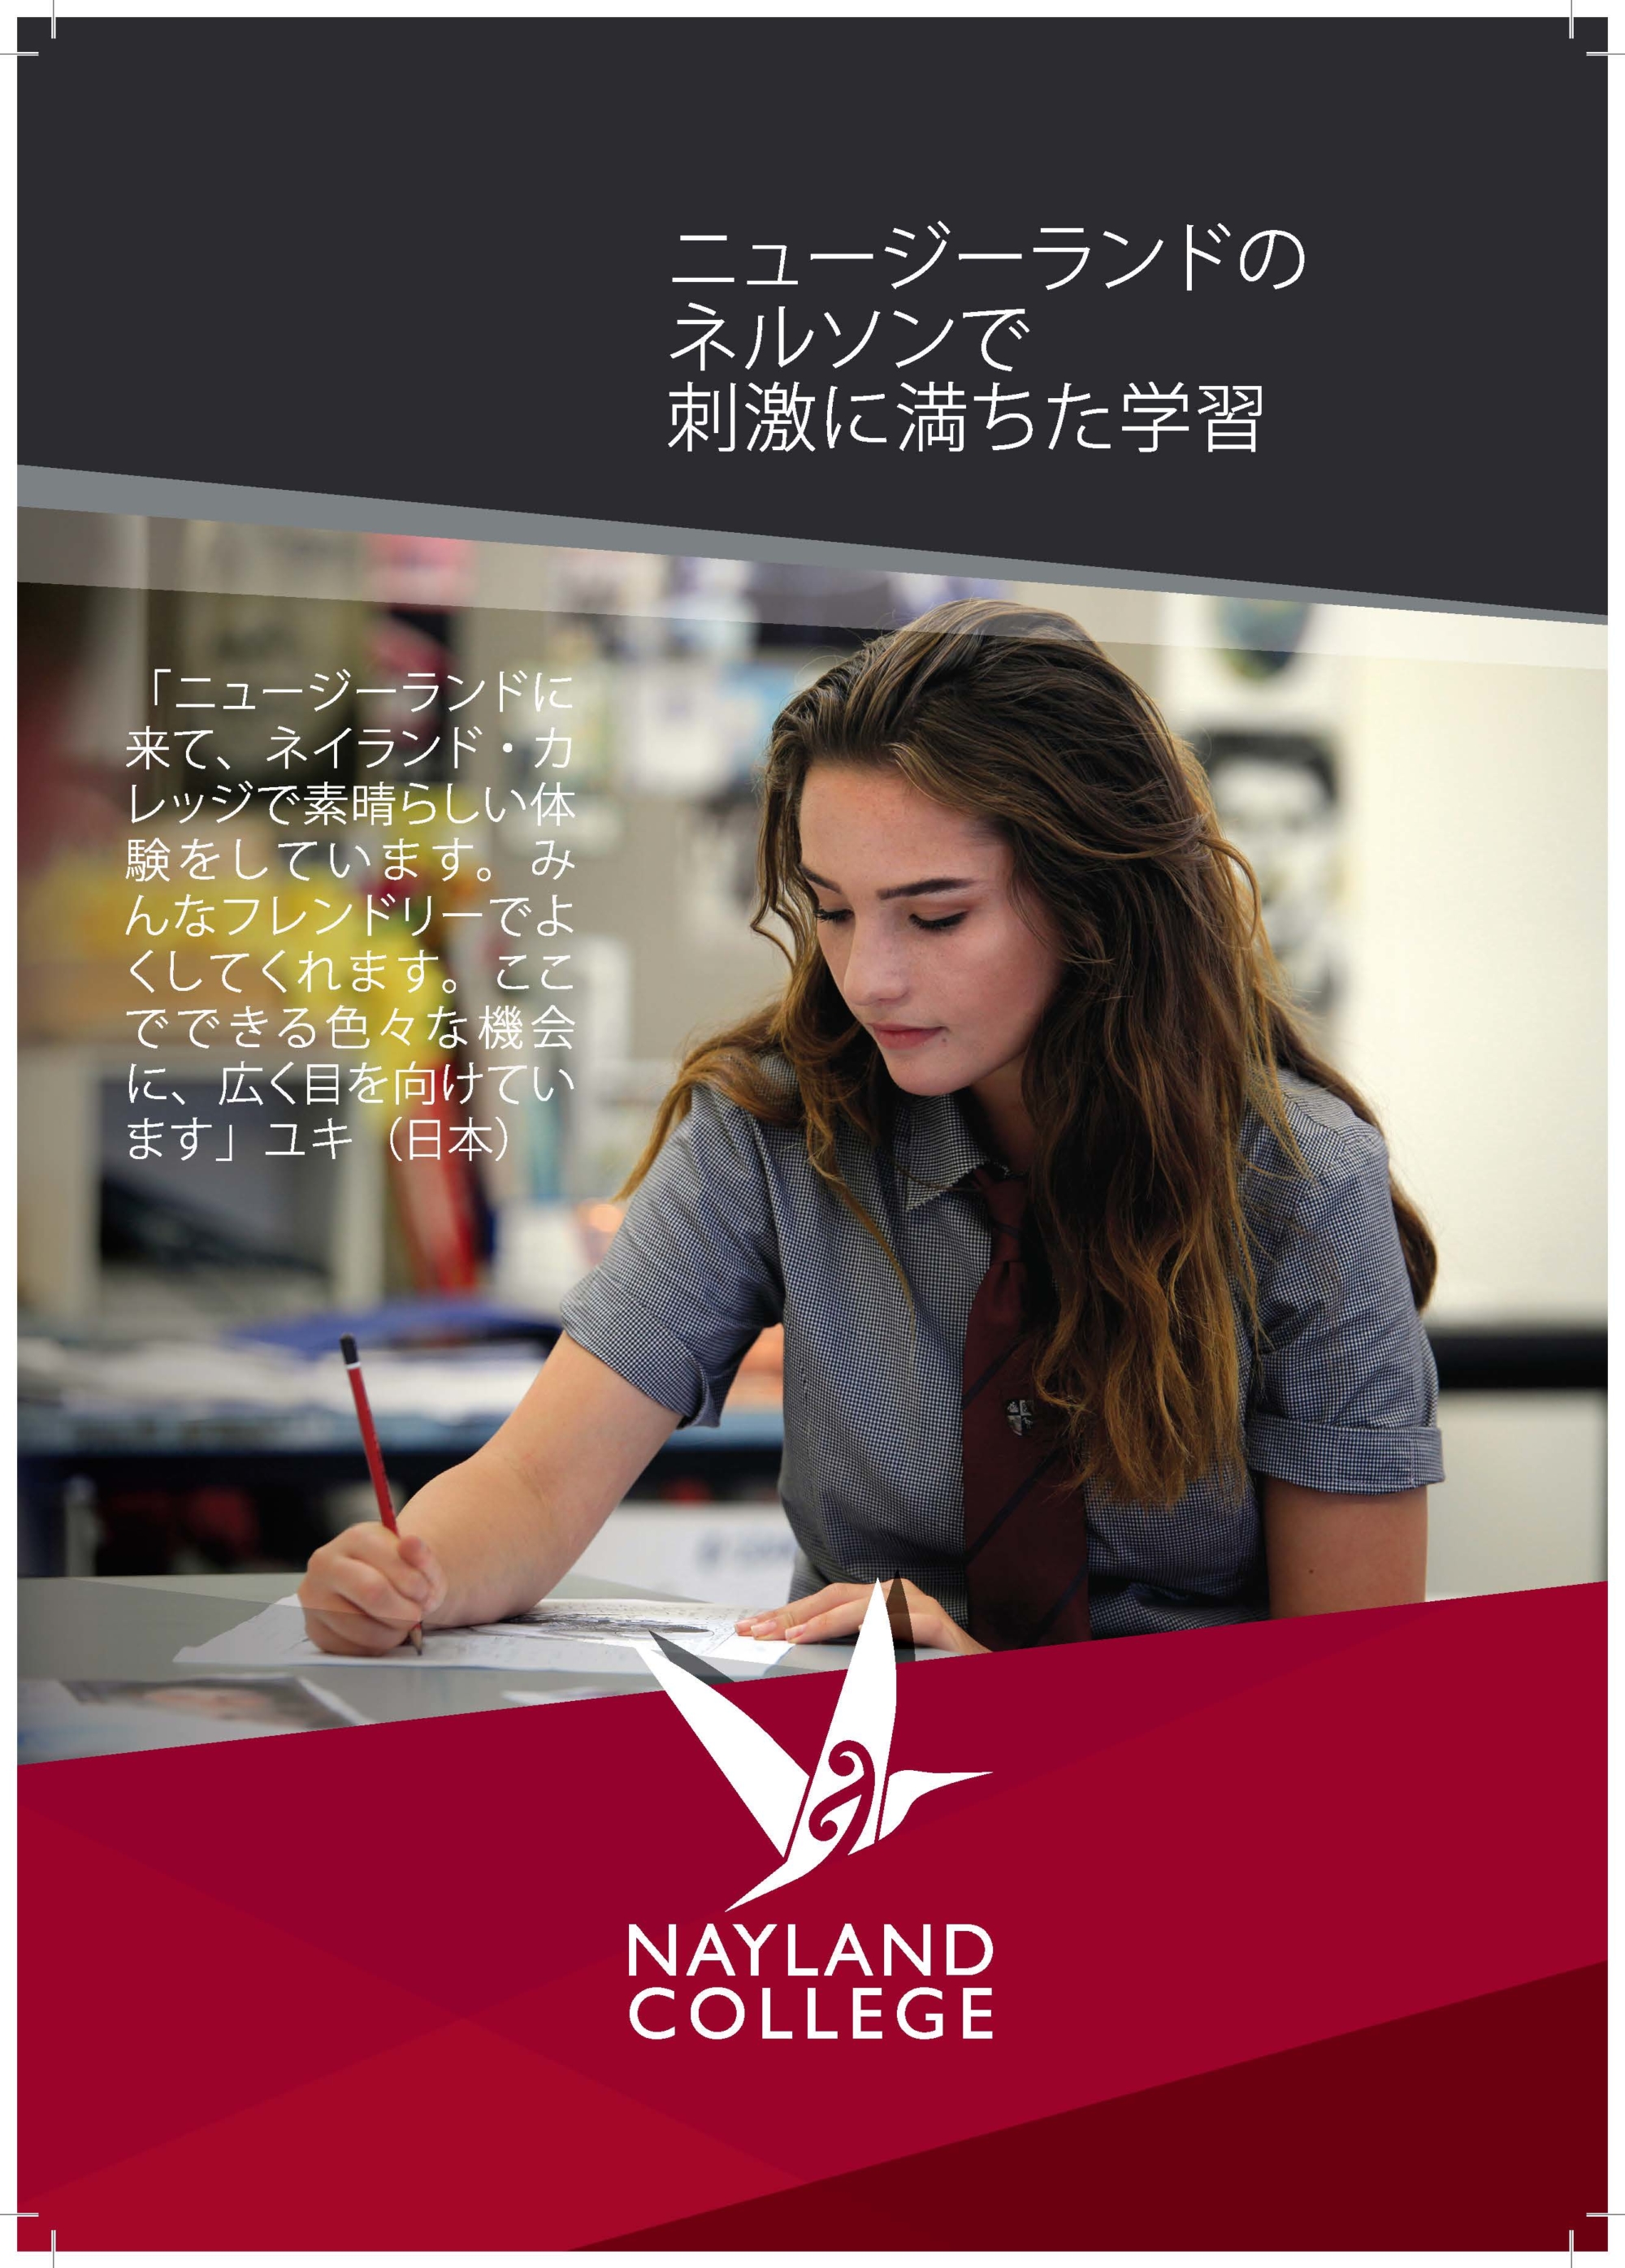 25117 - International Prospectus 2019 - Japanese (content is the previous version)_Page_1